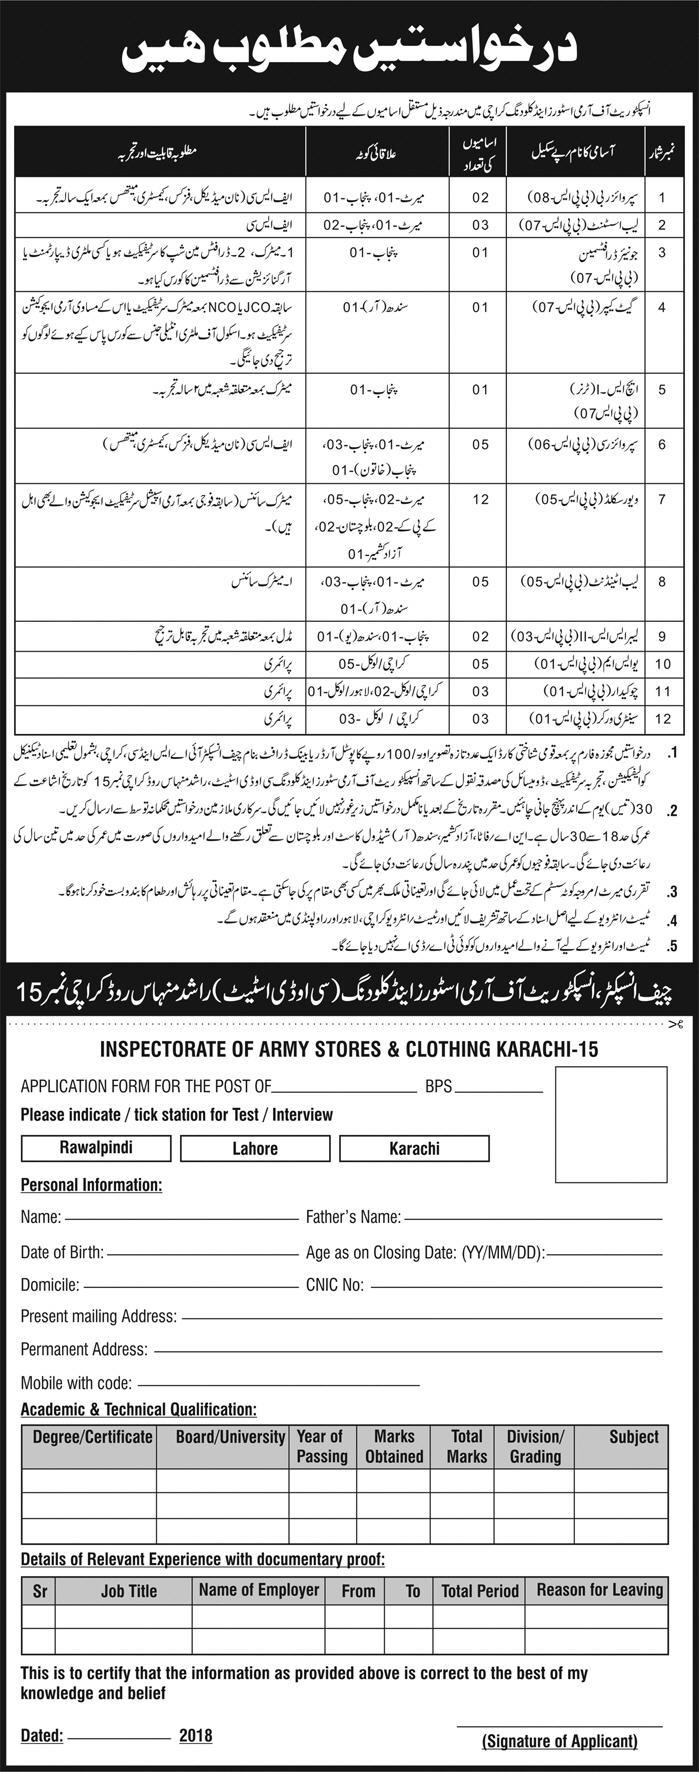 Jobs in Inspectorate of Army Stores & Clothing 03 June 2018